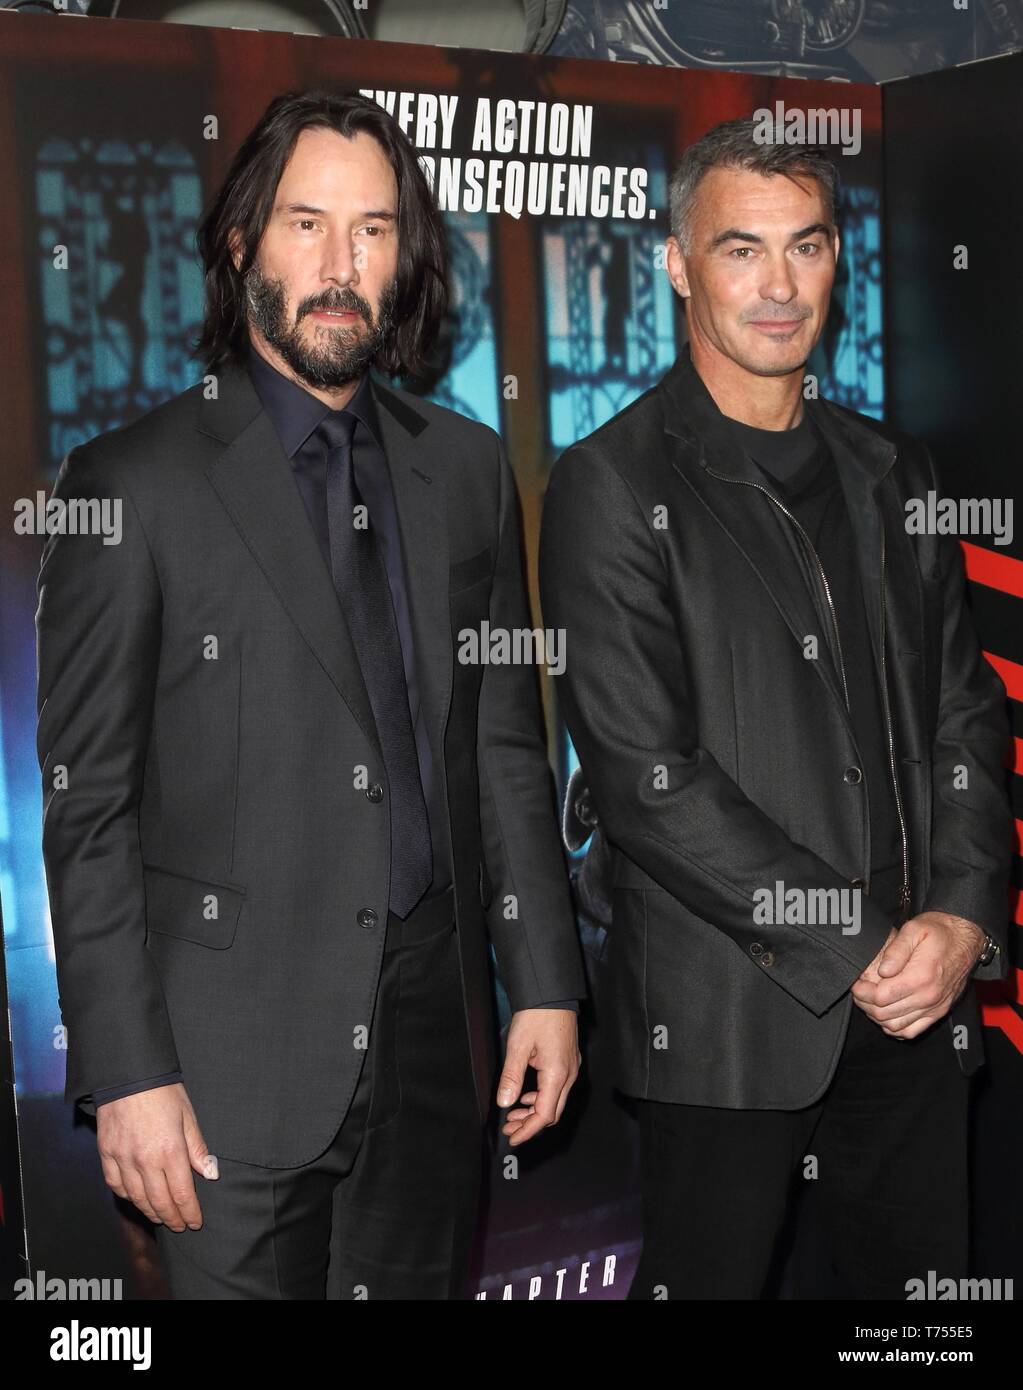 Keanu Reeves and Chad Stahelski seen attending the John Wick: Chapter 3 Parabellum, a special film screening at The Ham Yard Hotel, Denman Street. Stock Photo